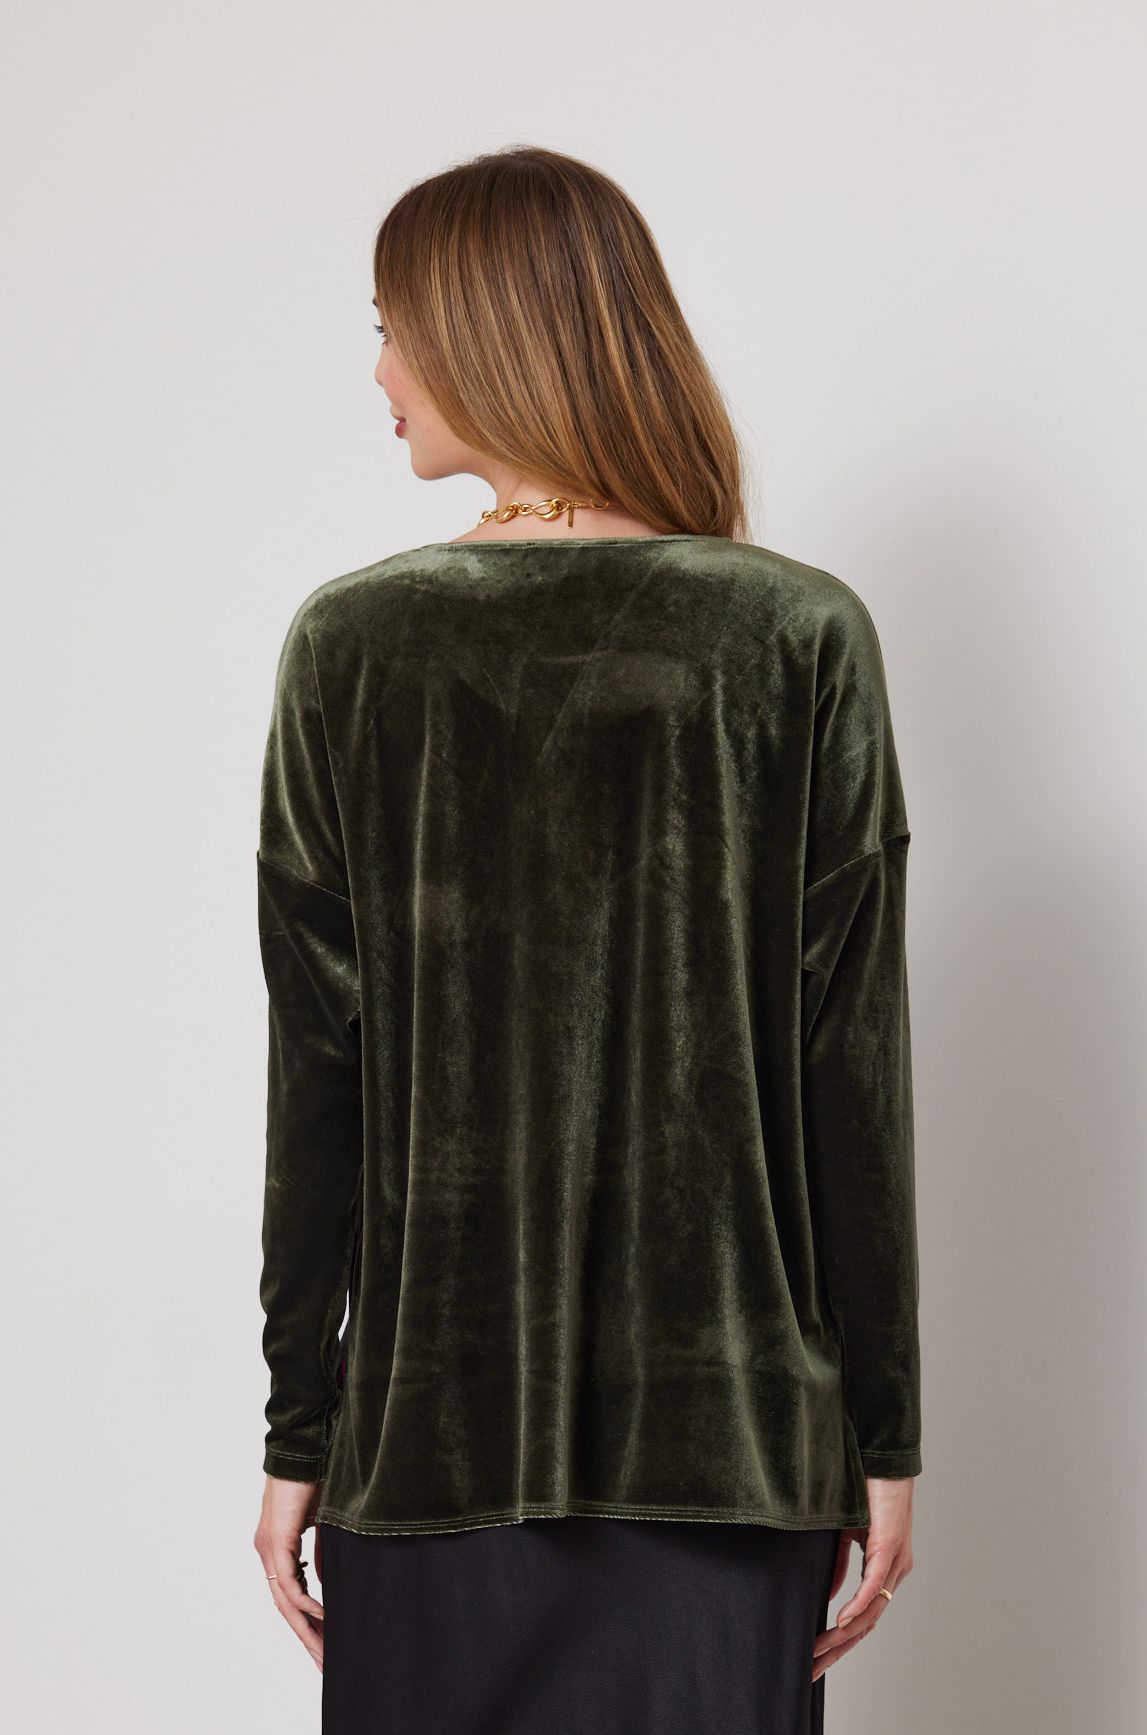 DUO MANON SPLICE TOP - OLIVE PRINT - THE VOGUE STORE